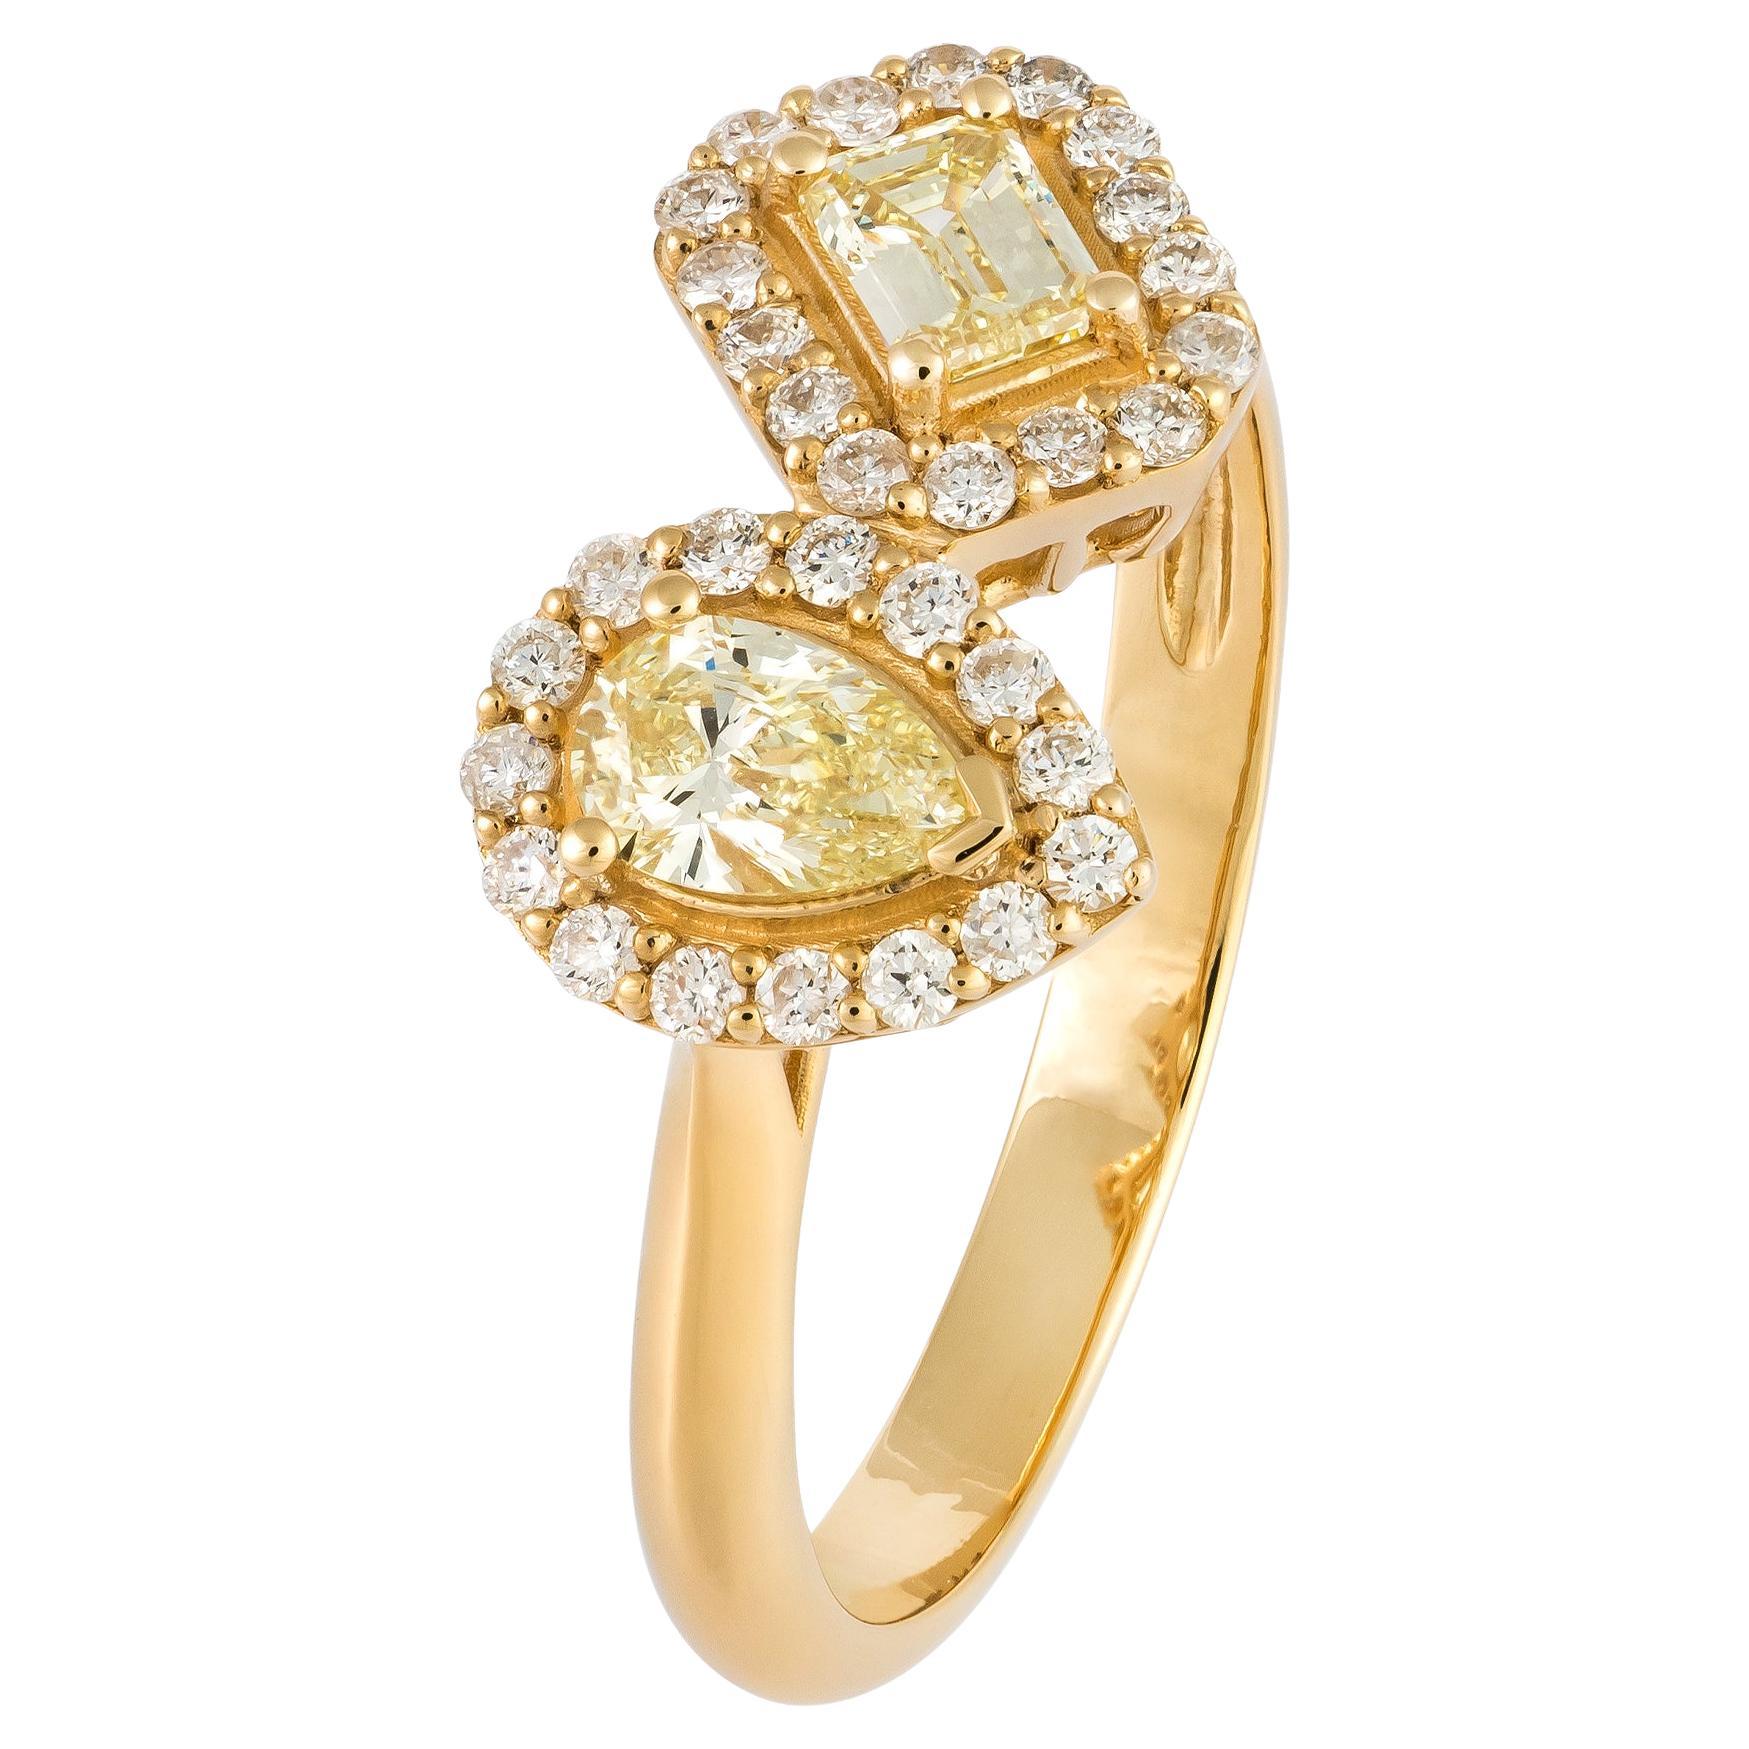 Customizable Fancy Yellow 18K Gold White Diamond Ring For Her For Sale ...